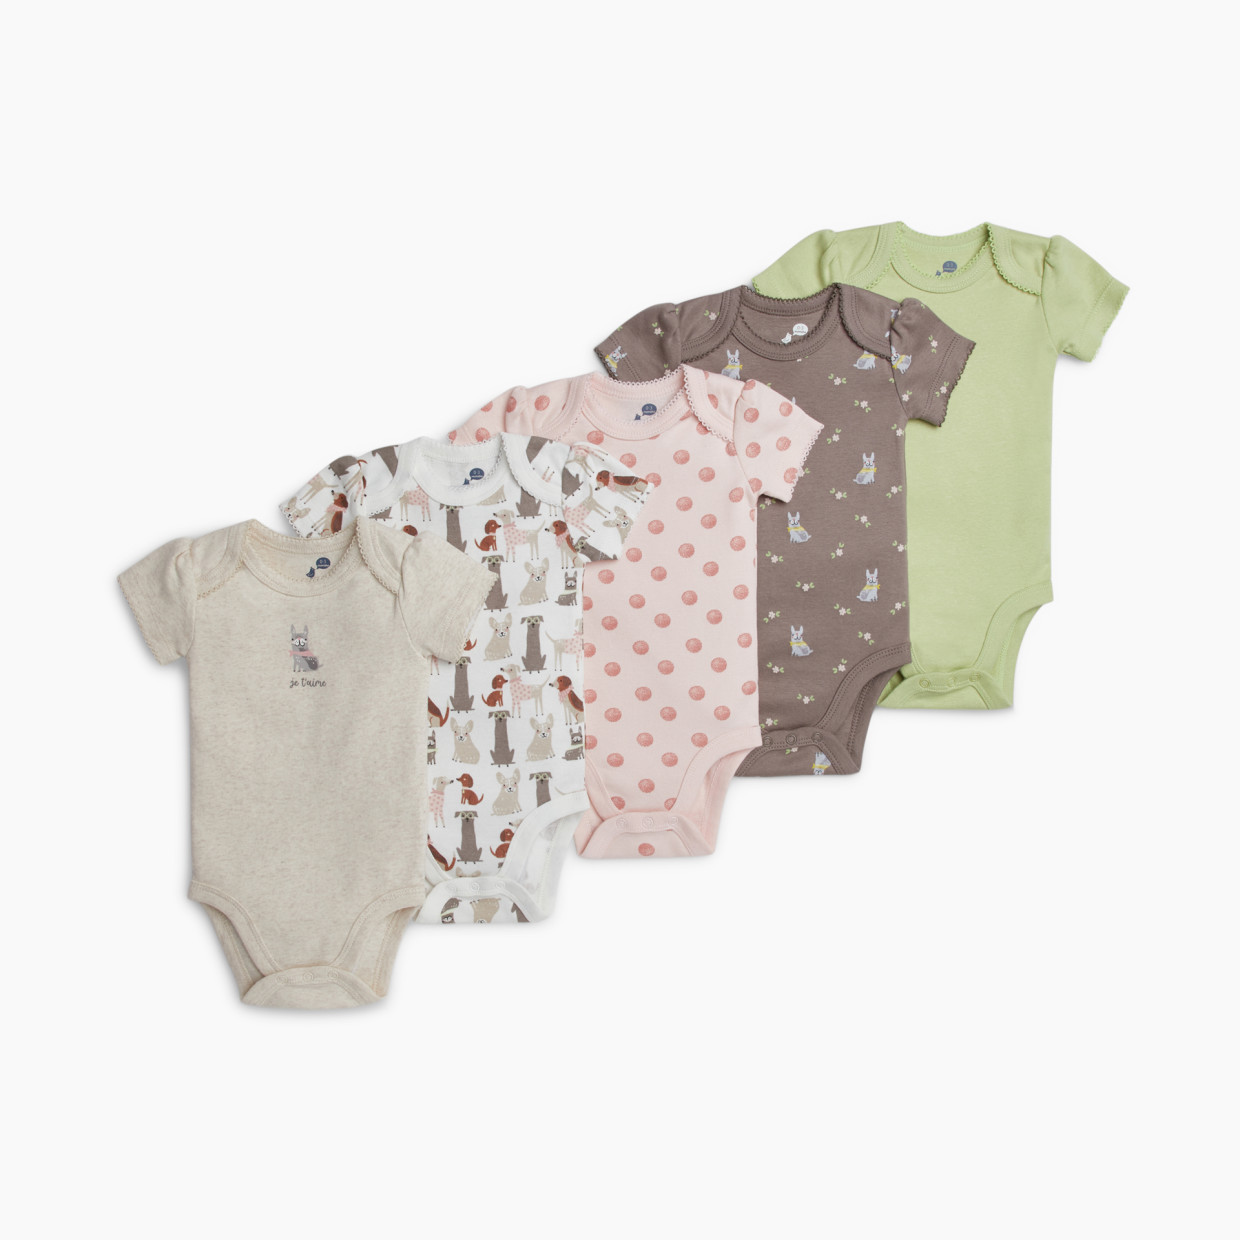 Small Story Short Sleeve Bodysuit Printed (5 Pack) - All Over Dogs, 3-6 M.